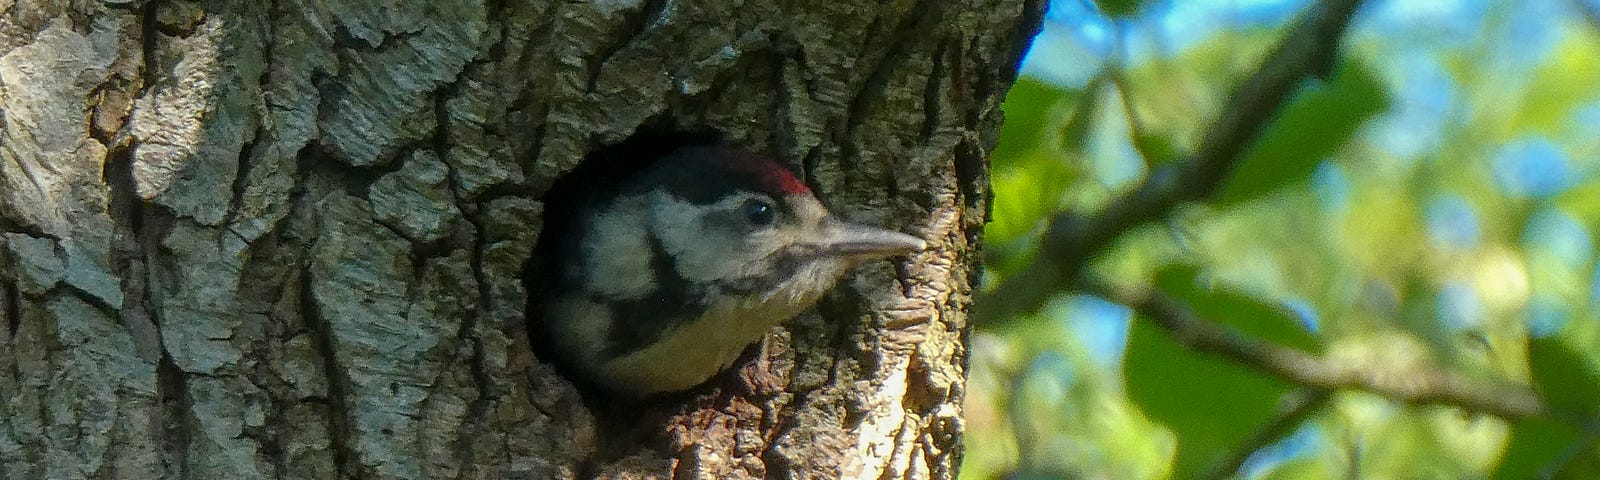 Woodpecker with upper portion of body outside of nest (hole in tree).